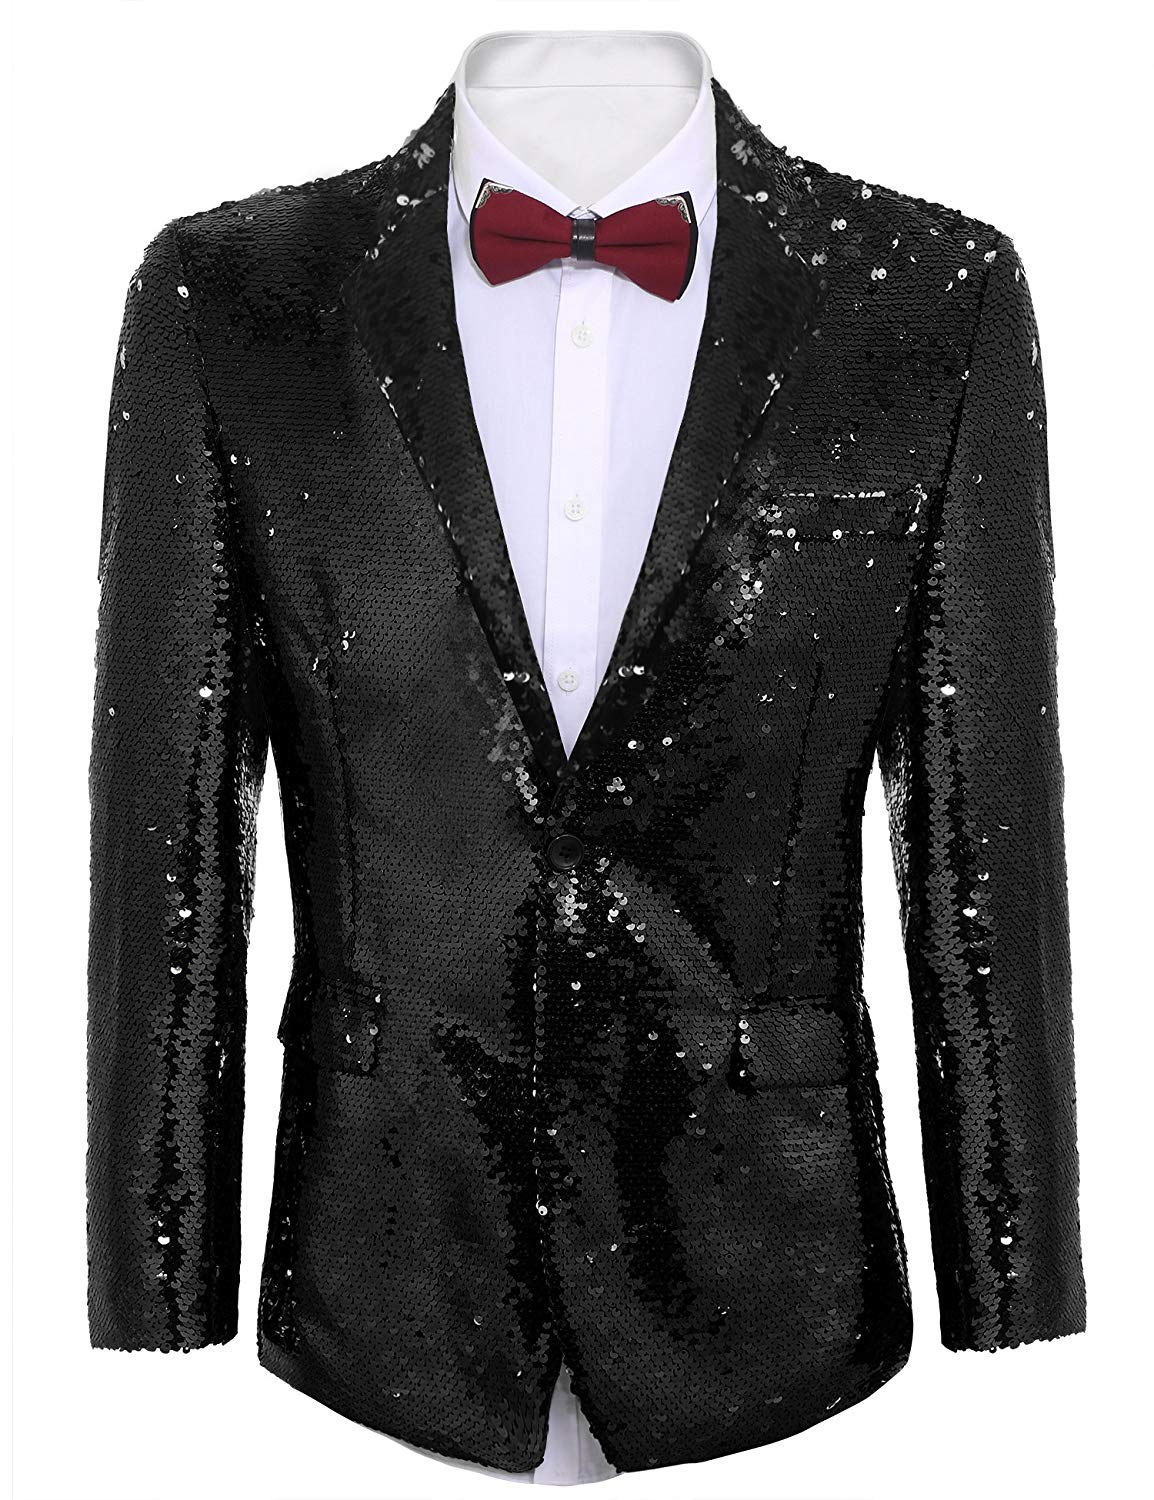 COOFANDY Men's Shiny Sequins Suit Jacket Blazer One Button Tuxedo for Party,Wedding,Banquet,Prom